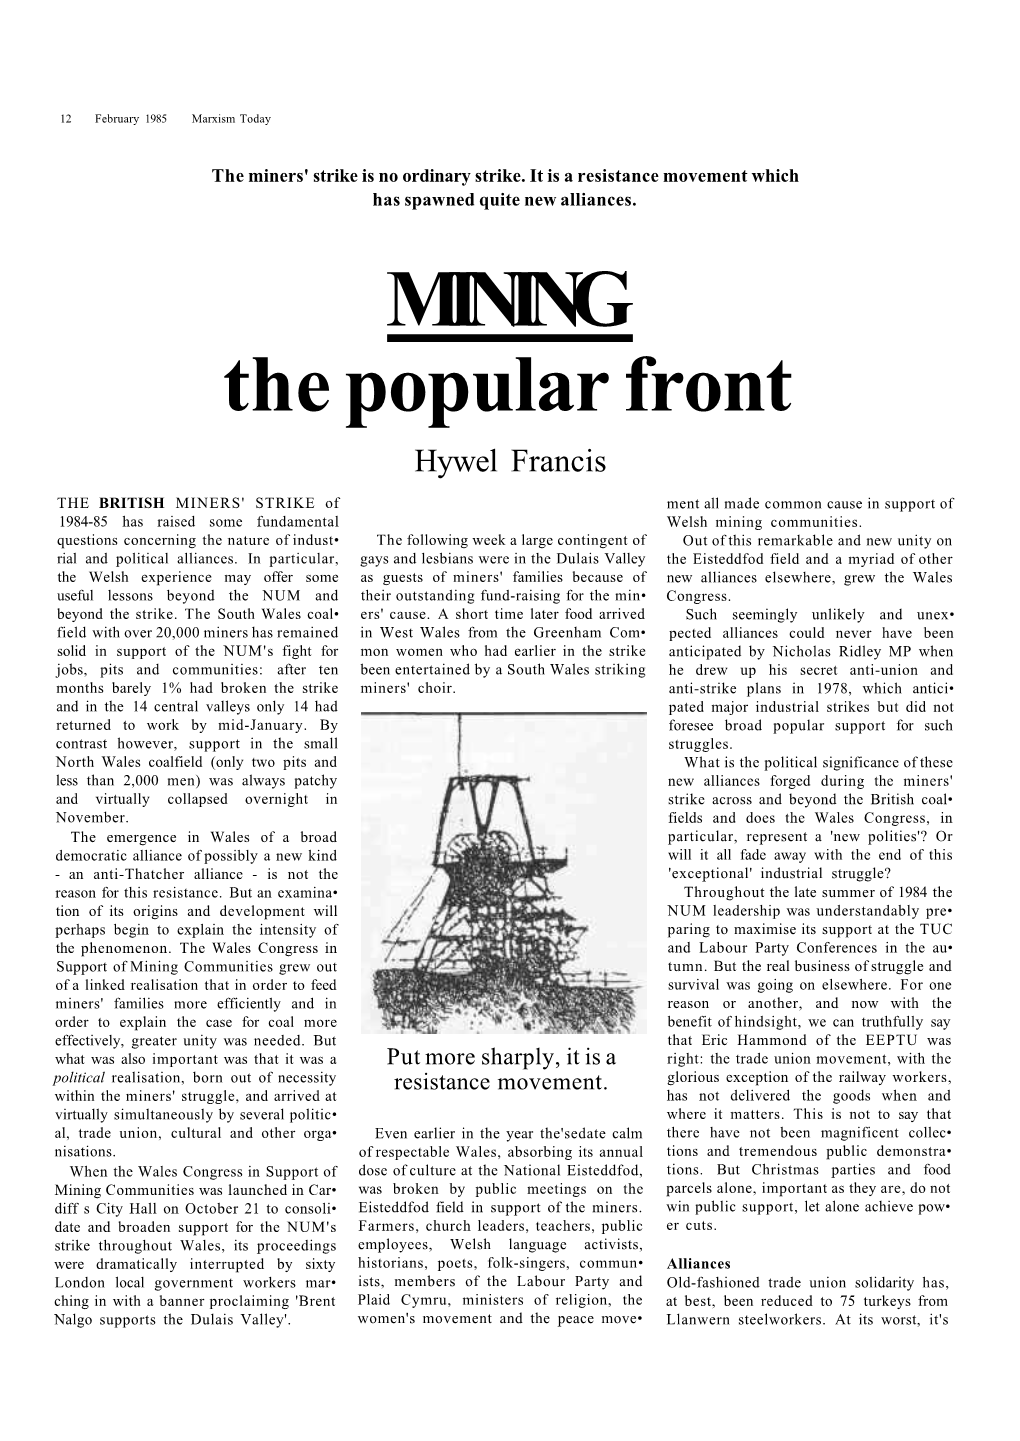 MINING the Popular Front Hywel Francis